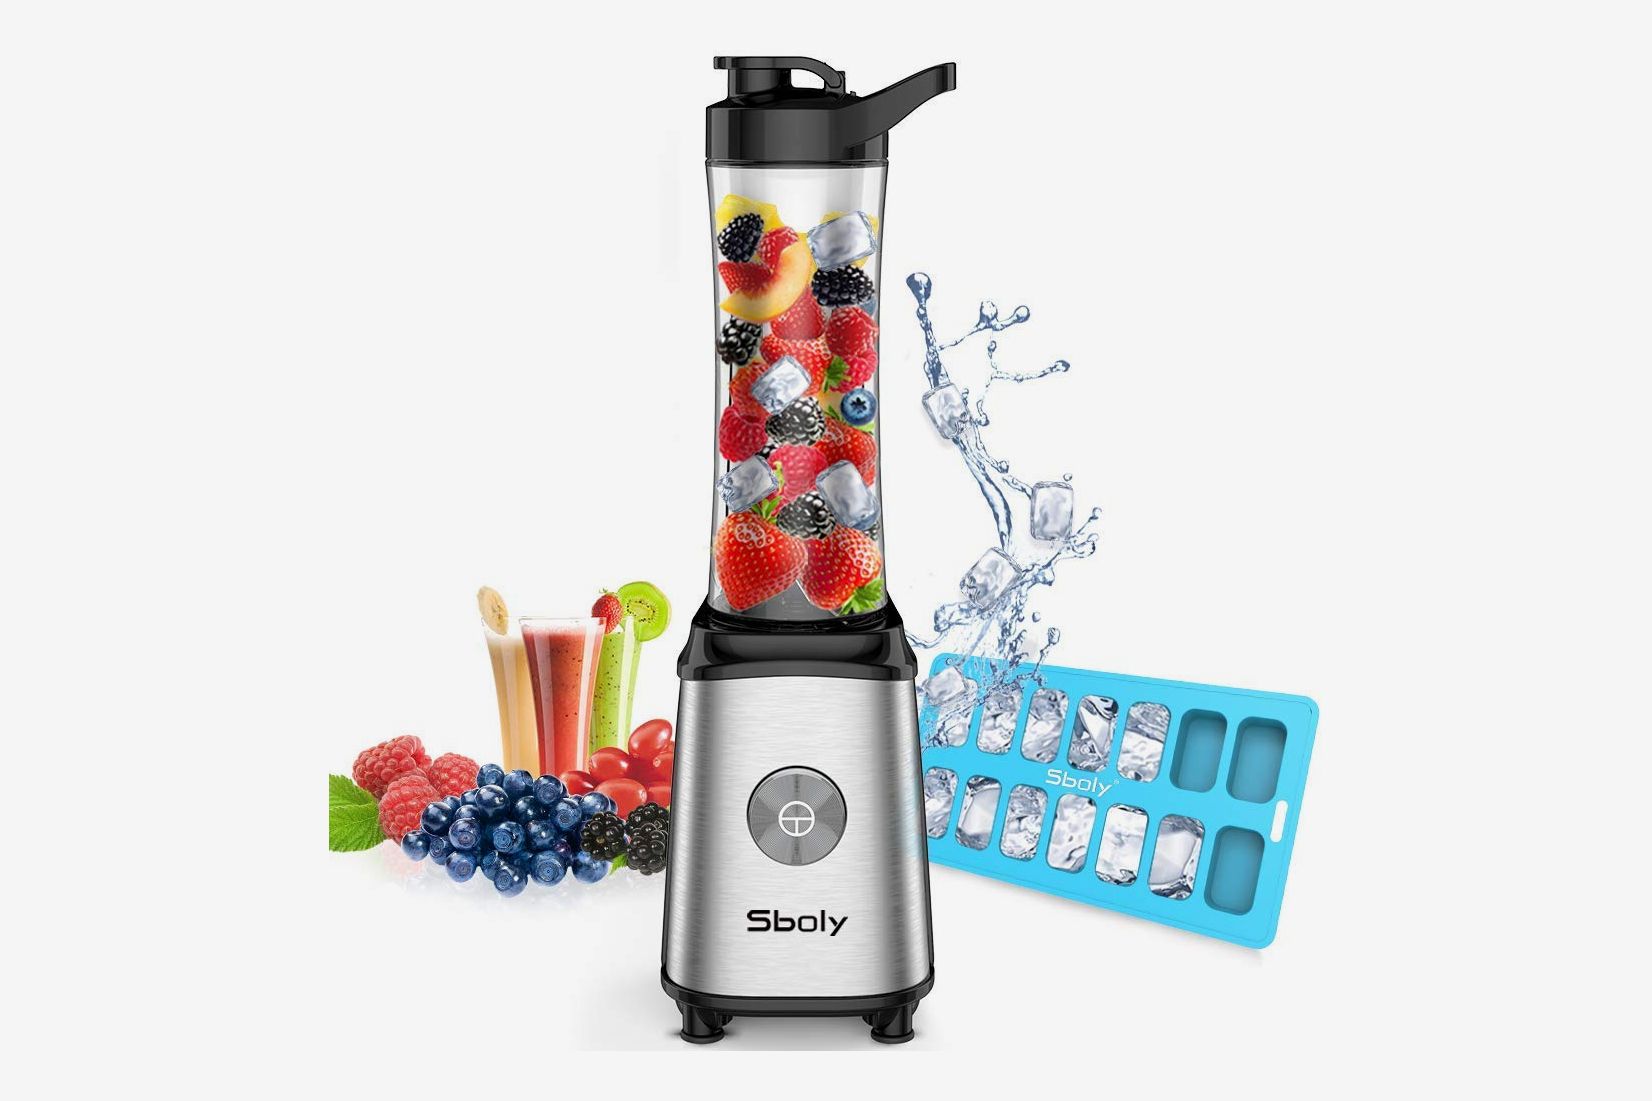 Best smoothie blenders you can buy in 2019 (latest smoothie makers)